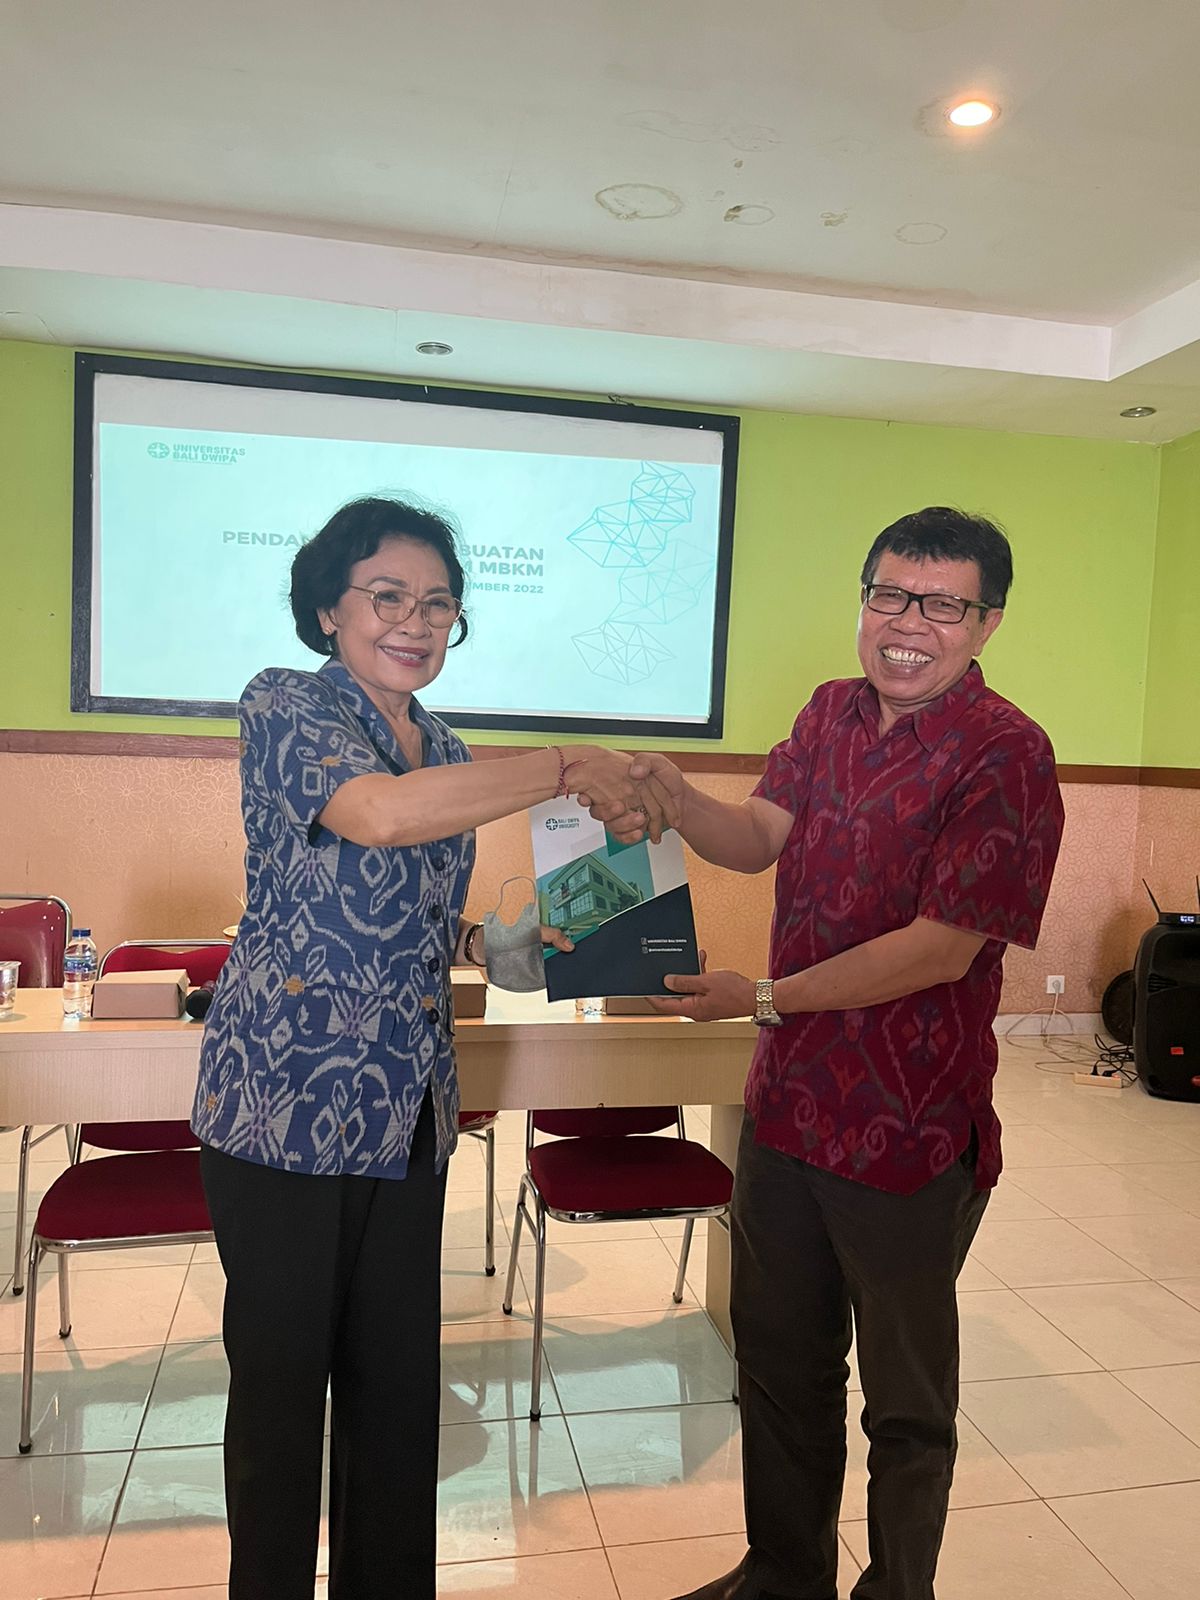 Professor of FTP Unud Trusted as Resource Person for Assistance in Making the MBKM Curriculum at the University of Bali Dwipa